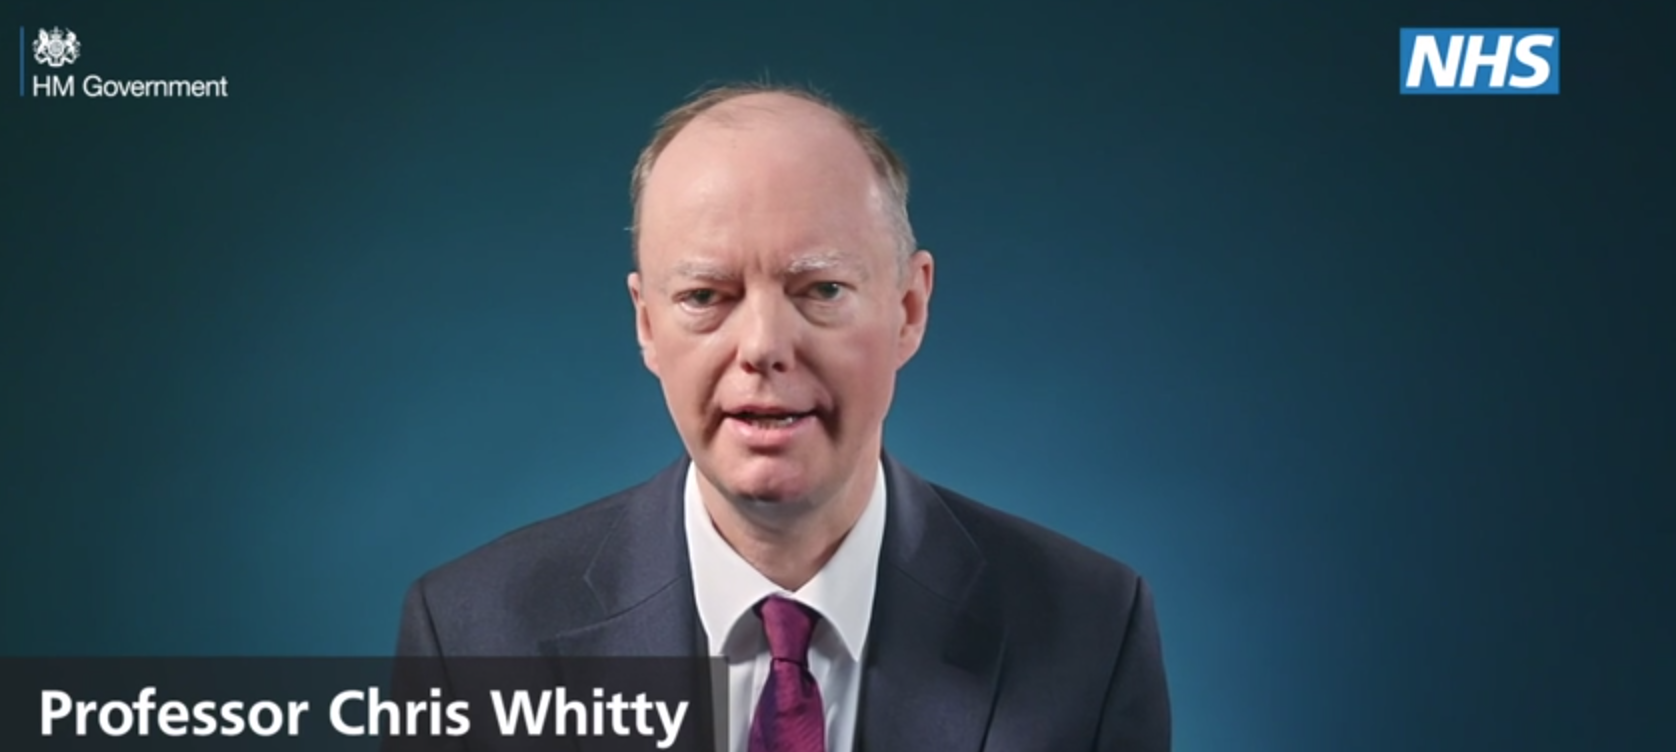 NEWS | Chief Medical Officer Professor Chris Whitty writes about the UK’s battle with COVID-19